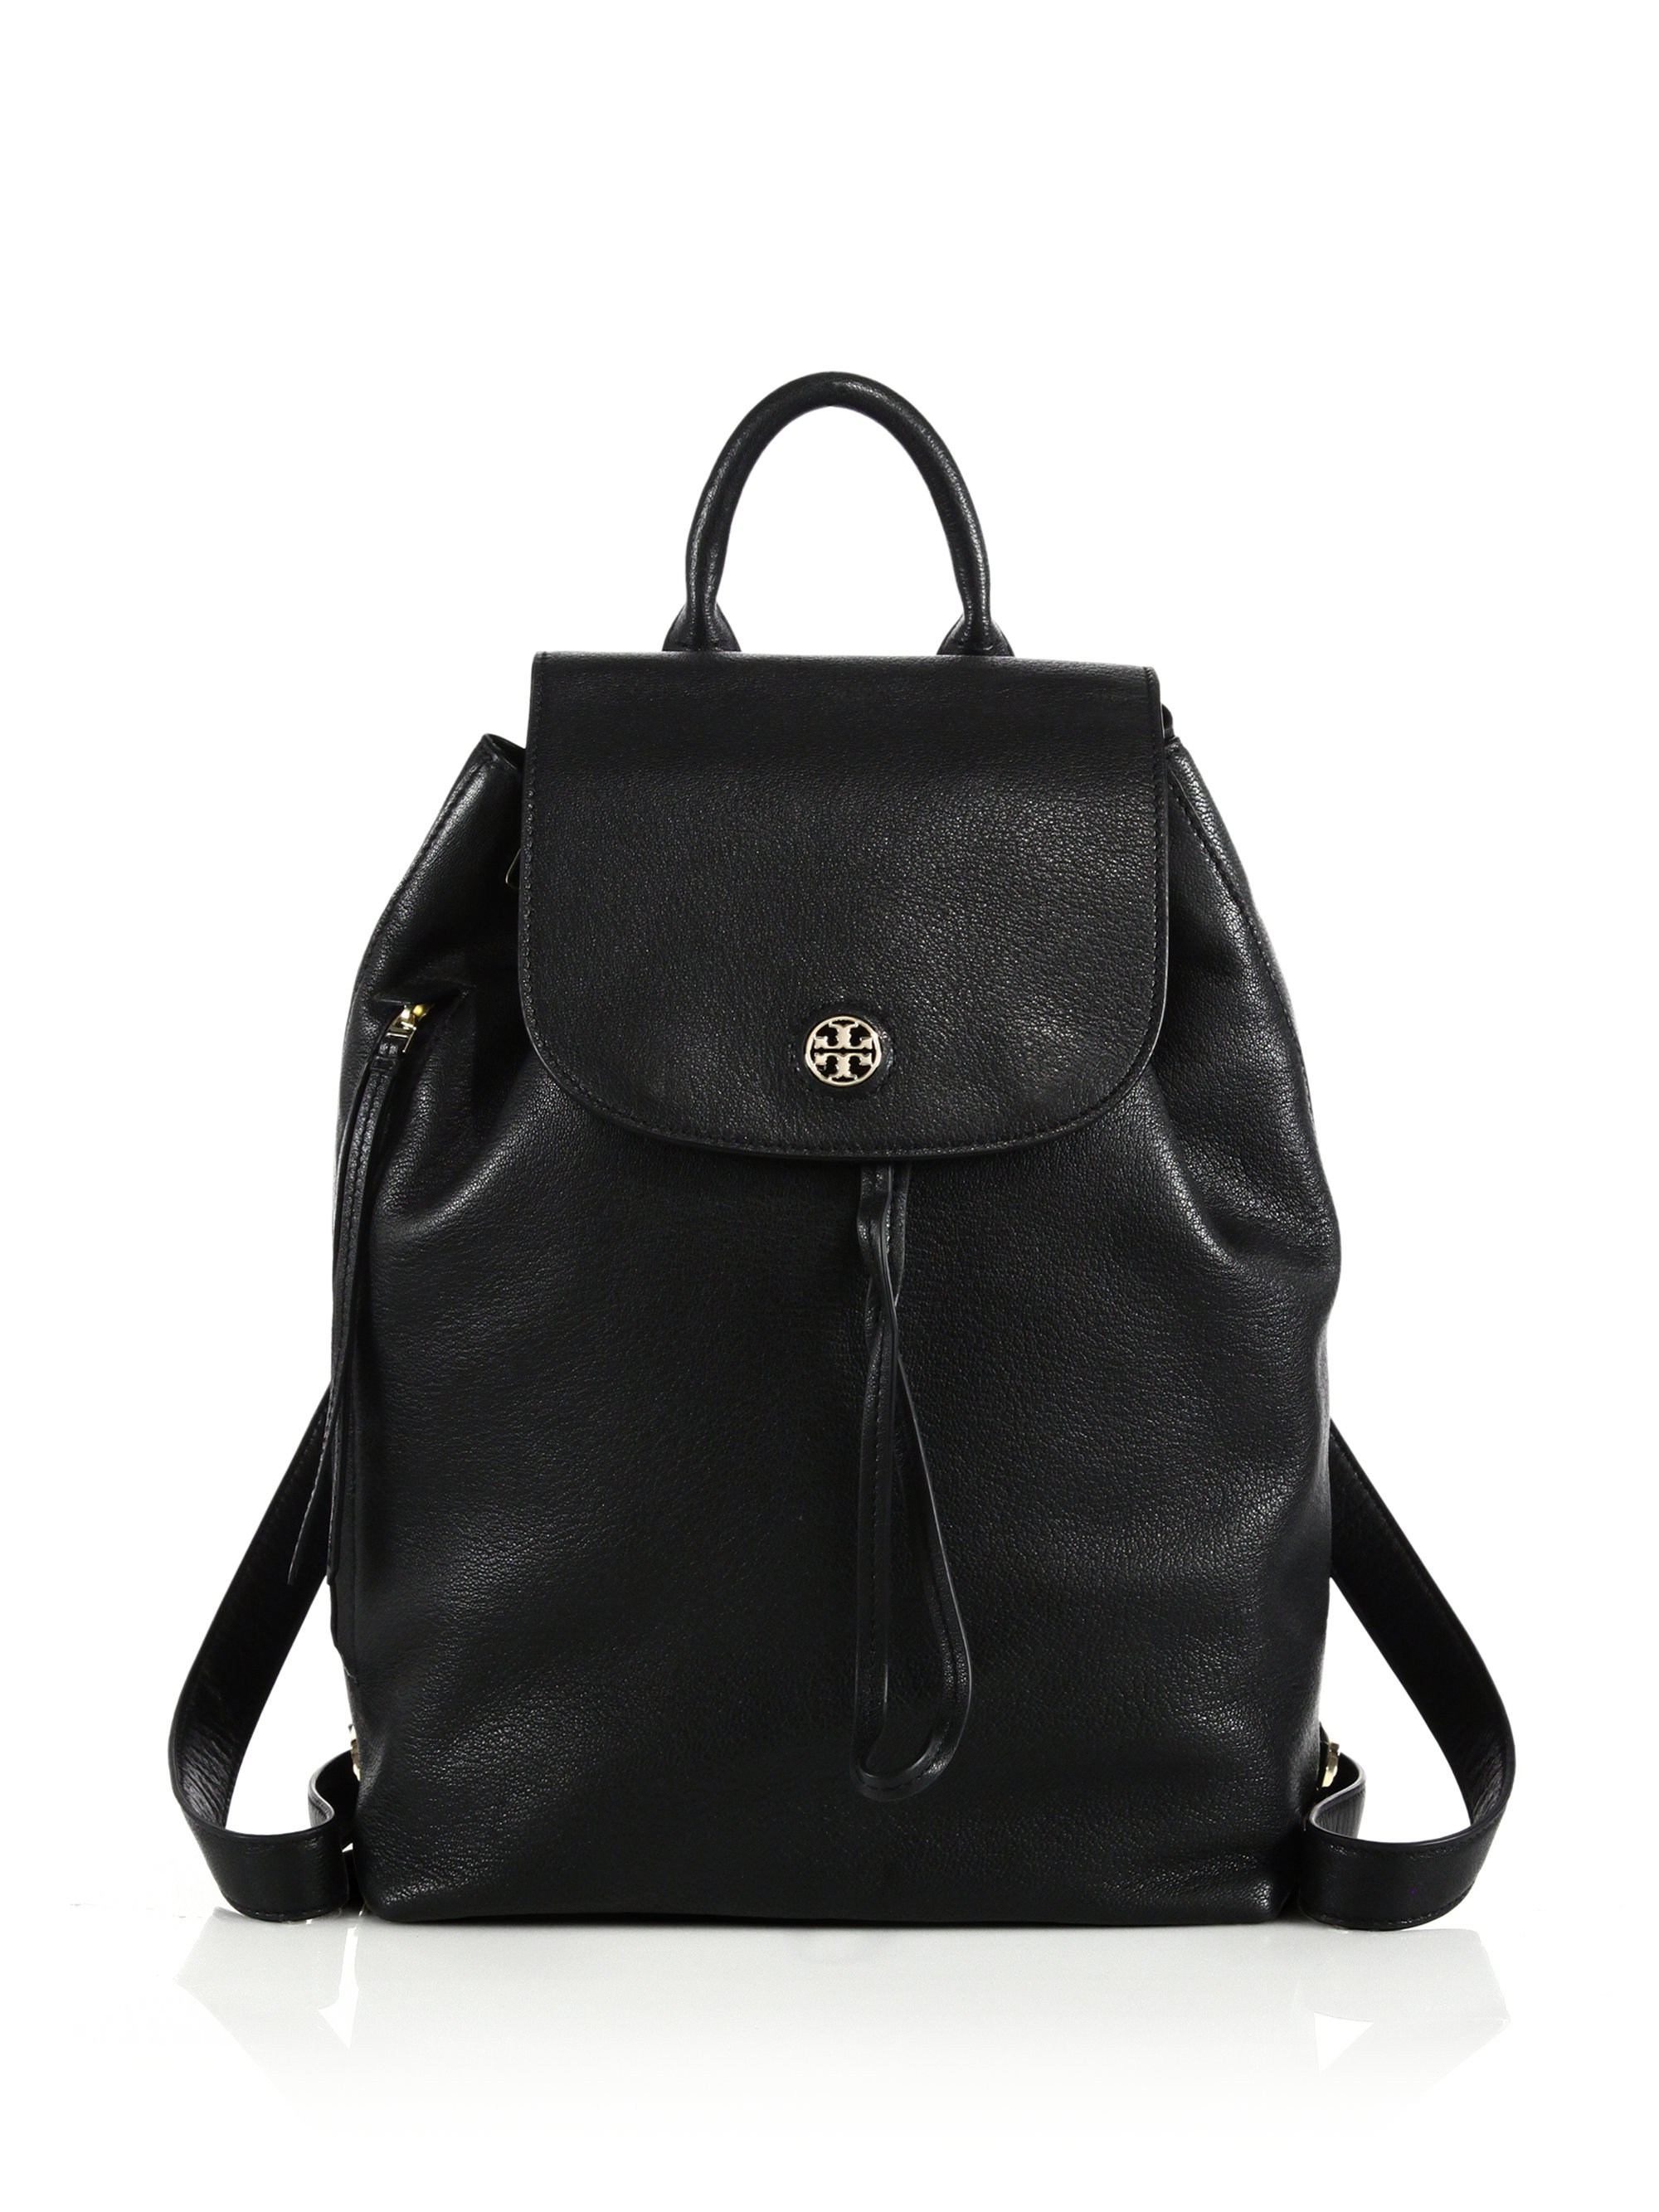 Top 38+ imagen black leather tory burch backpack